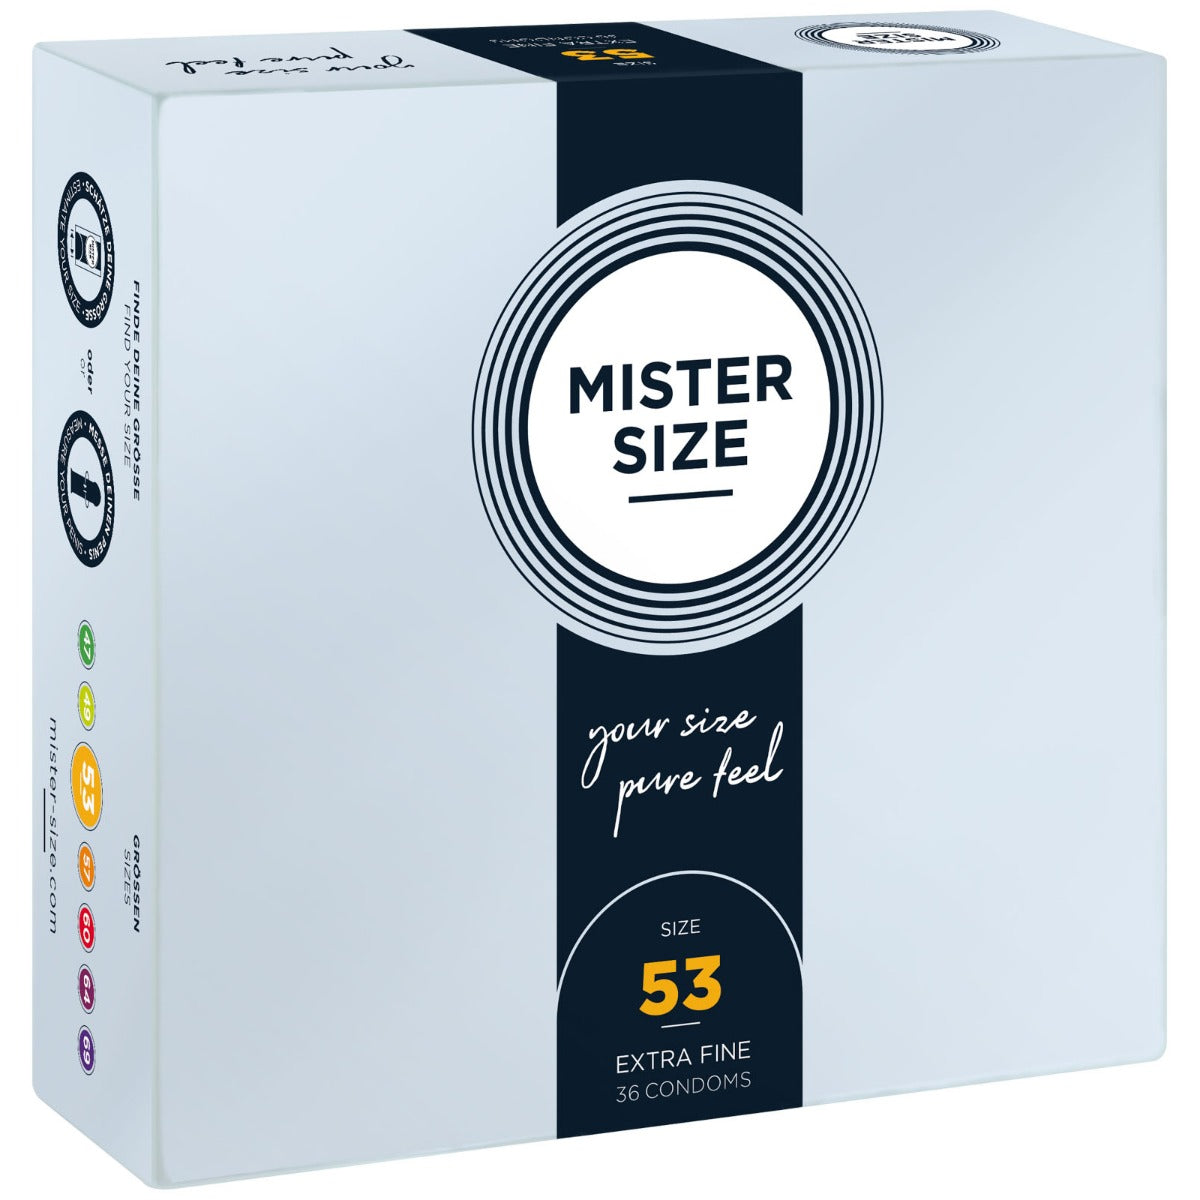 MISTER SIZE | Pure feel Condoms - Size 53 mm (36 pack)